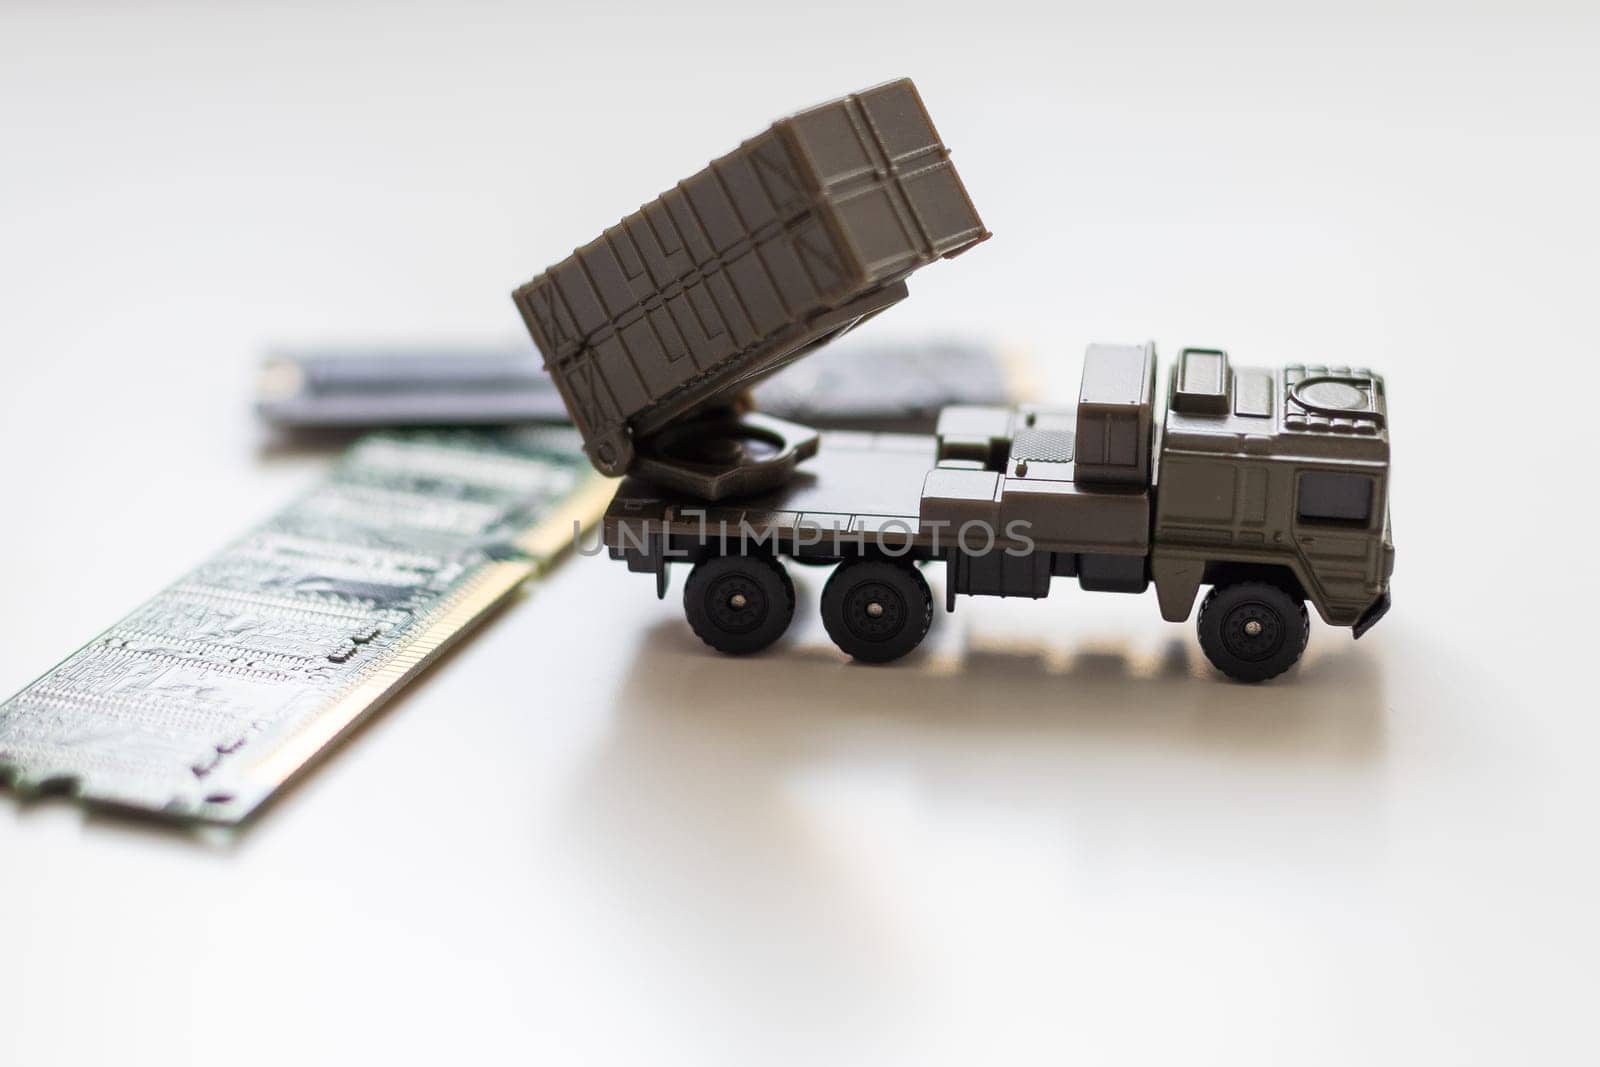 A toy military vehicle with a rocket and microcircuit. High quality photo